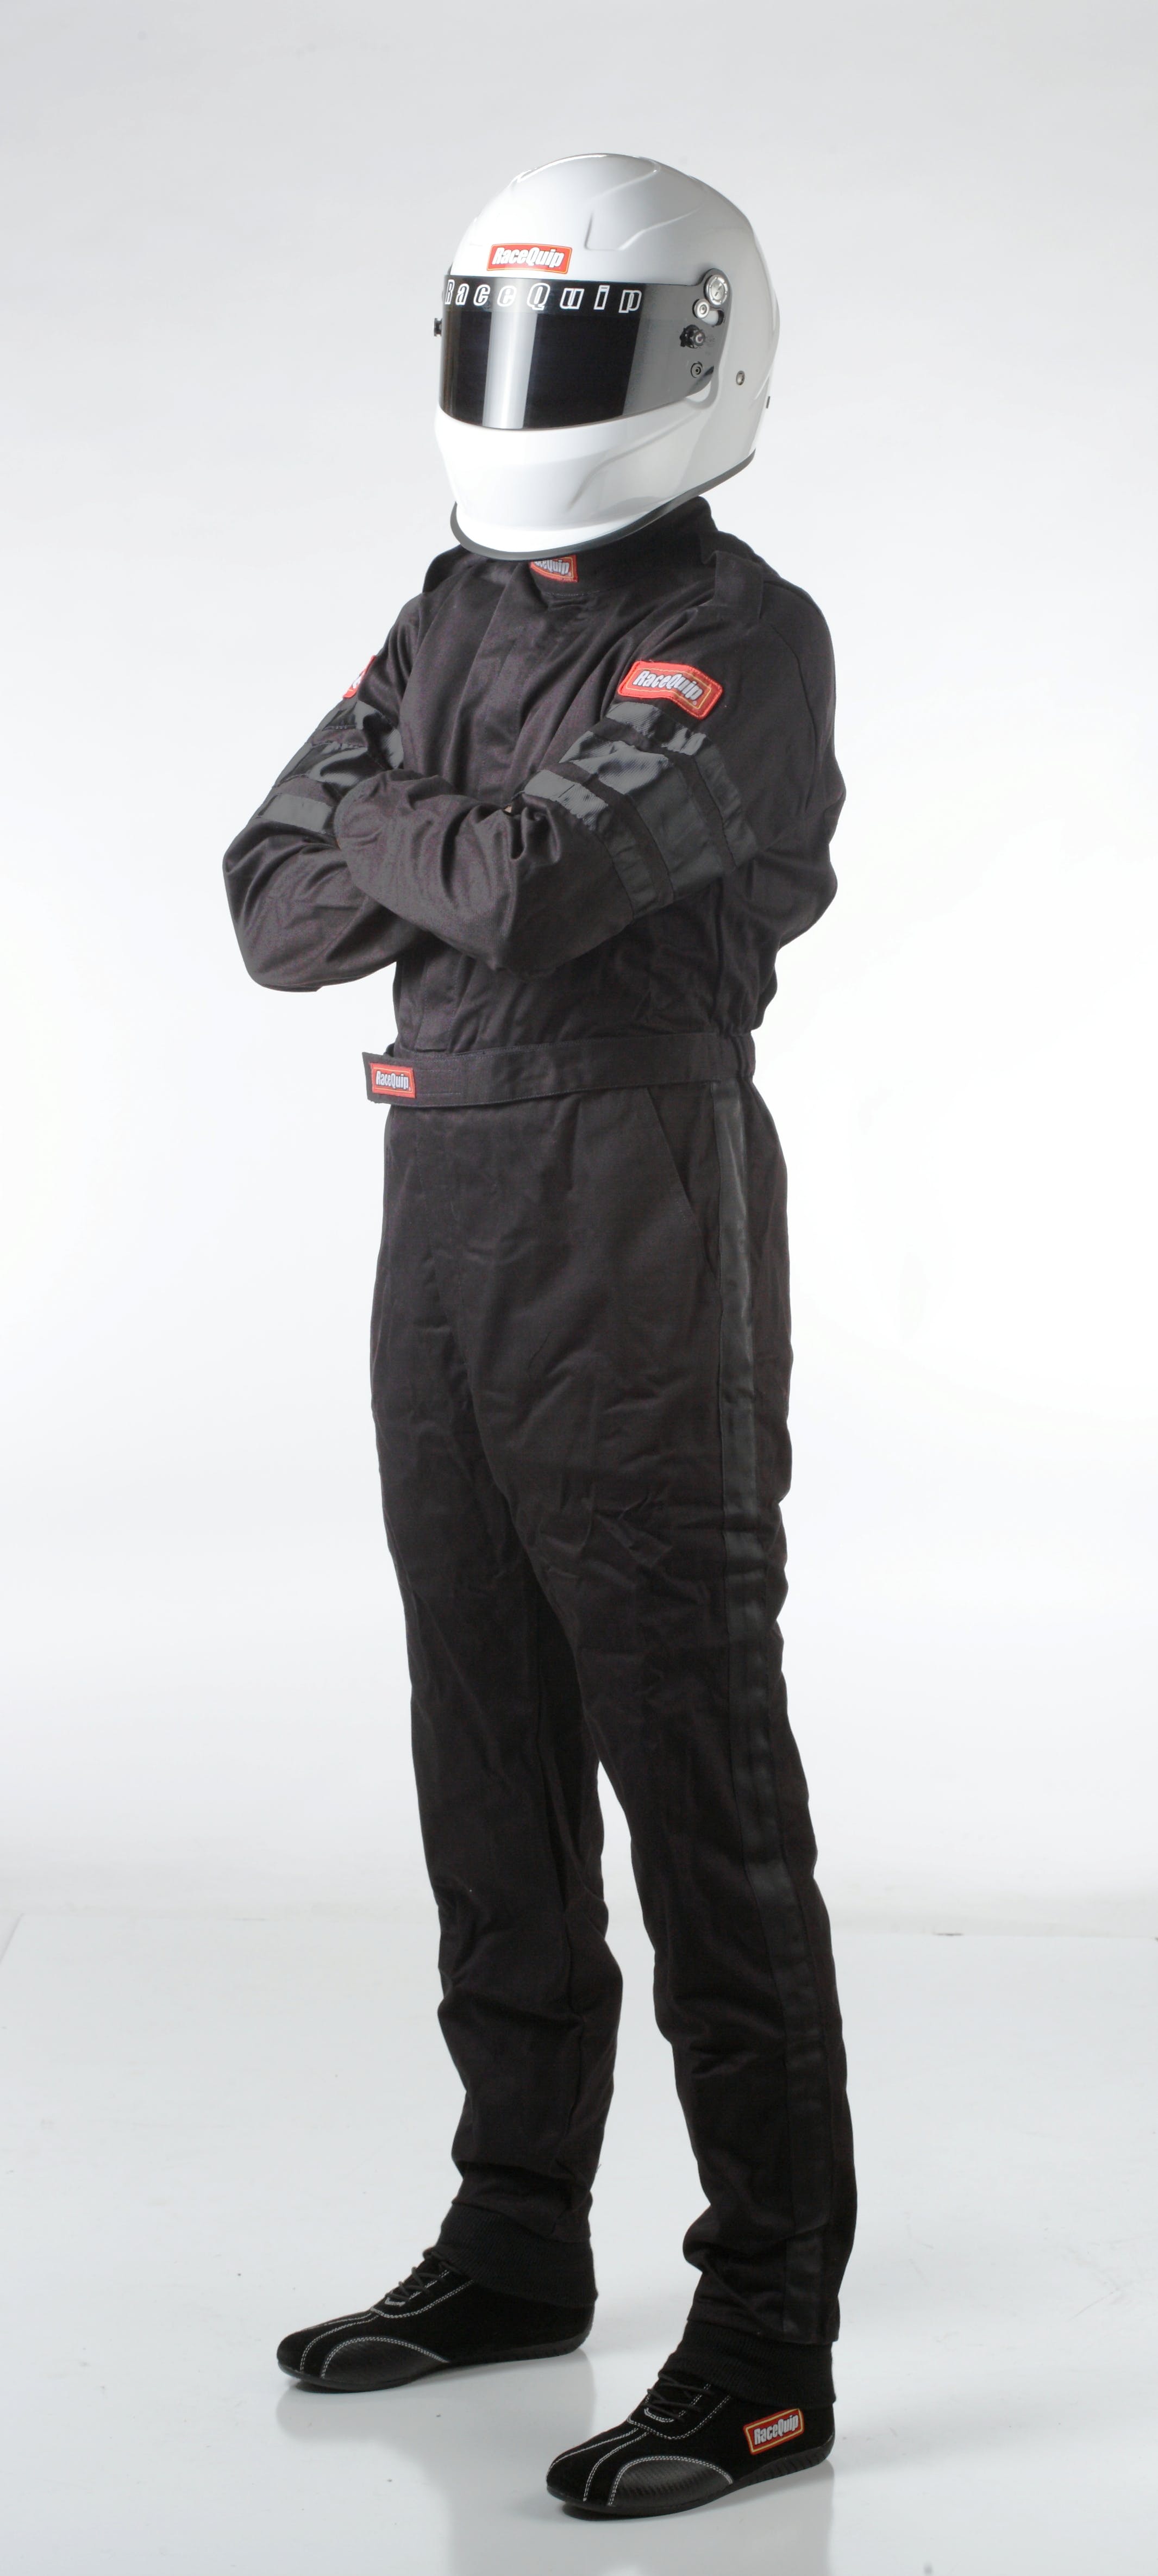 RaceQuip 110008 SFI-1 Pyrovatex One-Piece Single-Layer Racing Fire Suit (Black, 3X-Large)